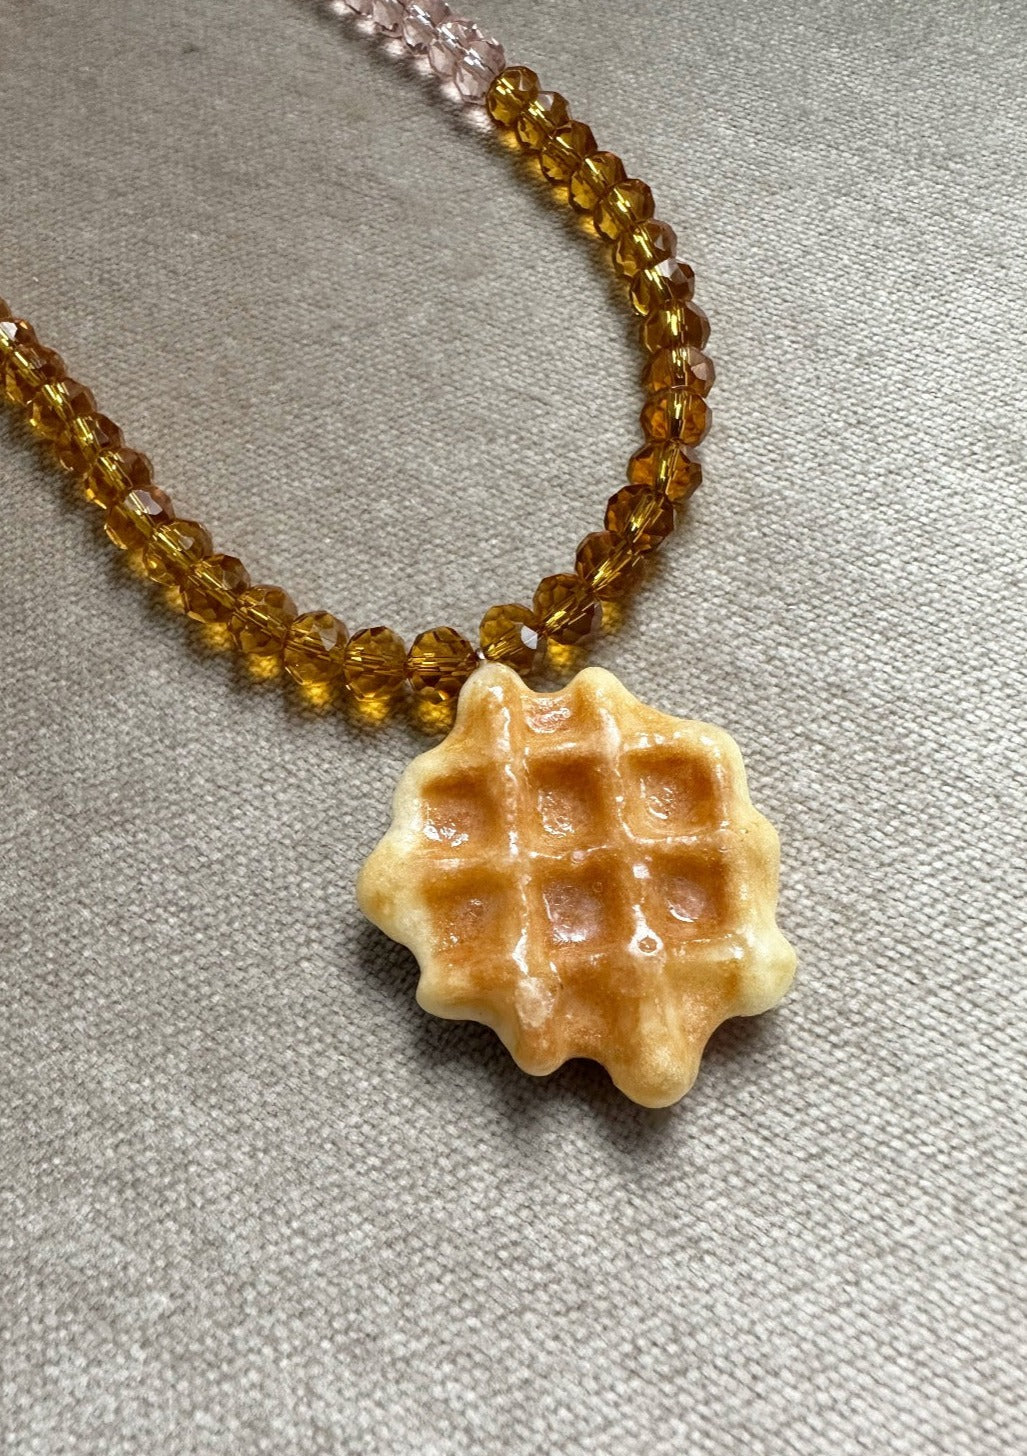 Real miniature waffle biscuit pendant preserved in resin on syrup and rose tone glass beaded chain with gold clasp.